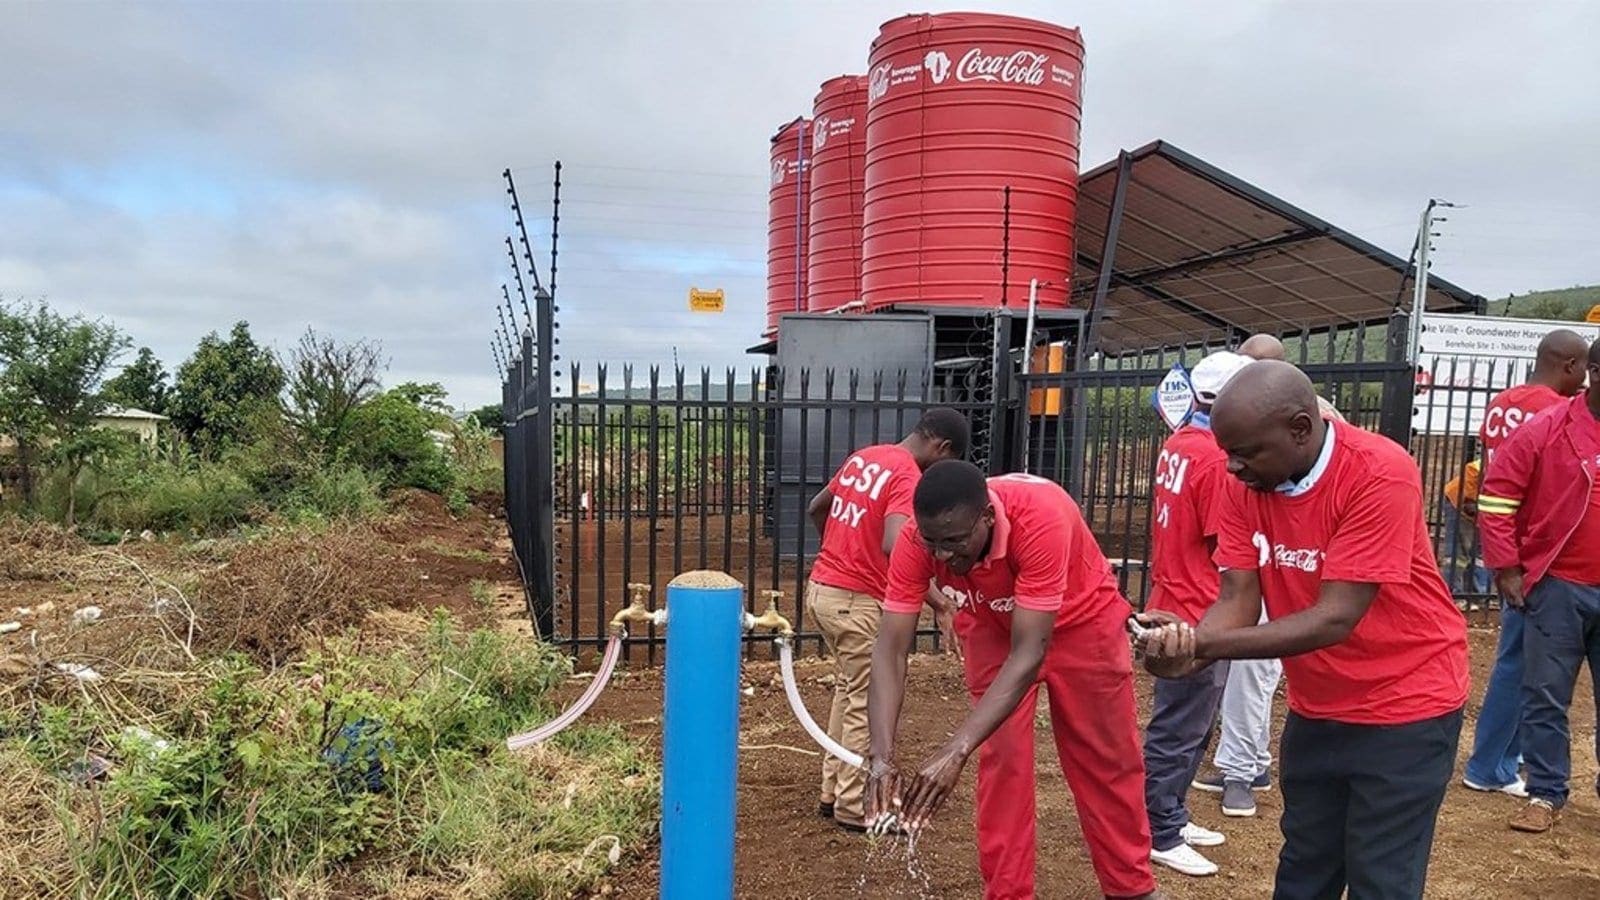 Coca-Cola launches social initiatives in South Africa, Kenya aimed to create thriving, sustainable communities